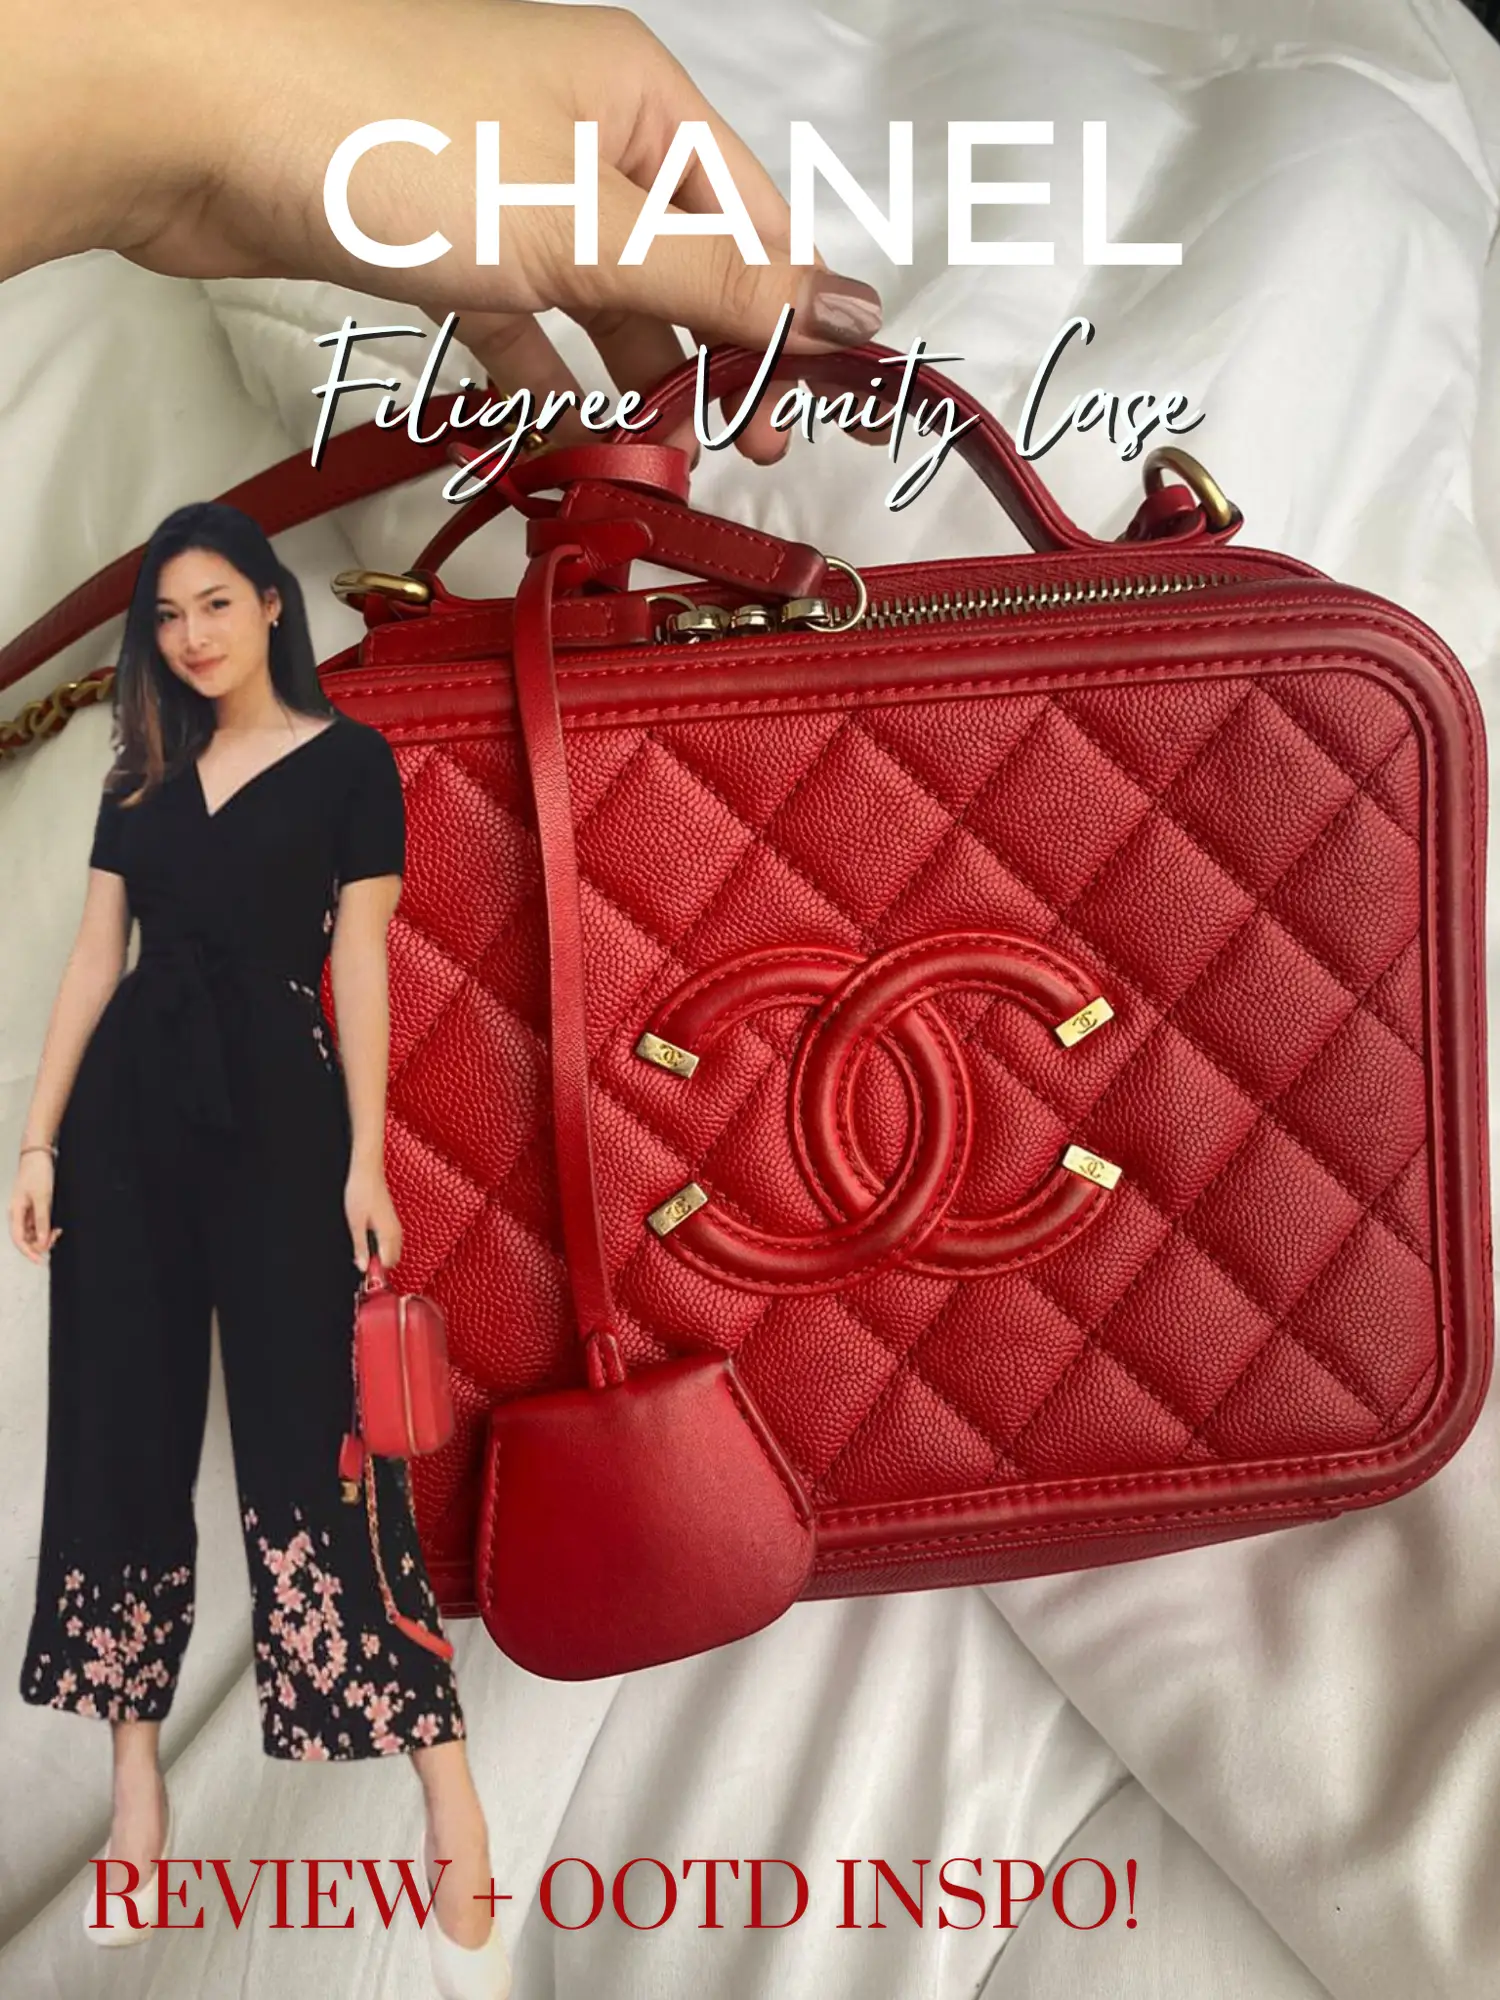 REVIEW CHANEL VANITY CASE IN RED ❤️, Gallery posted by Sharon